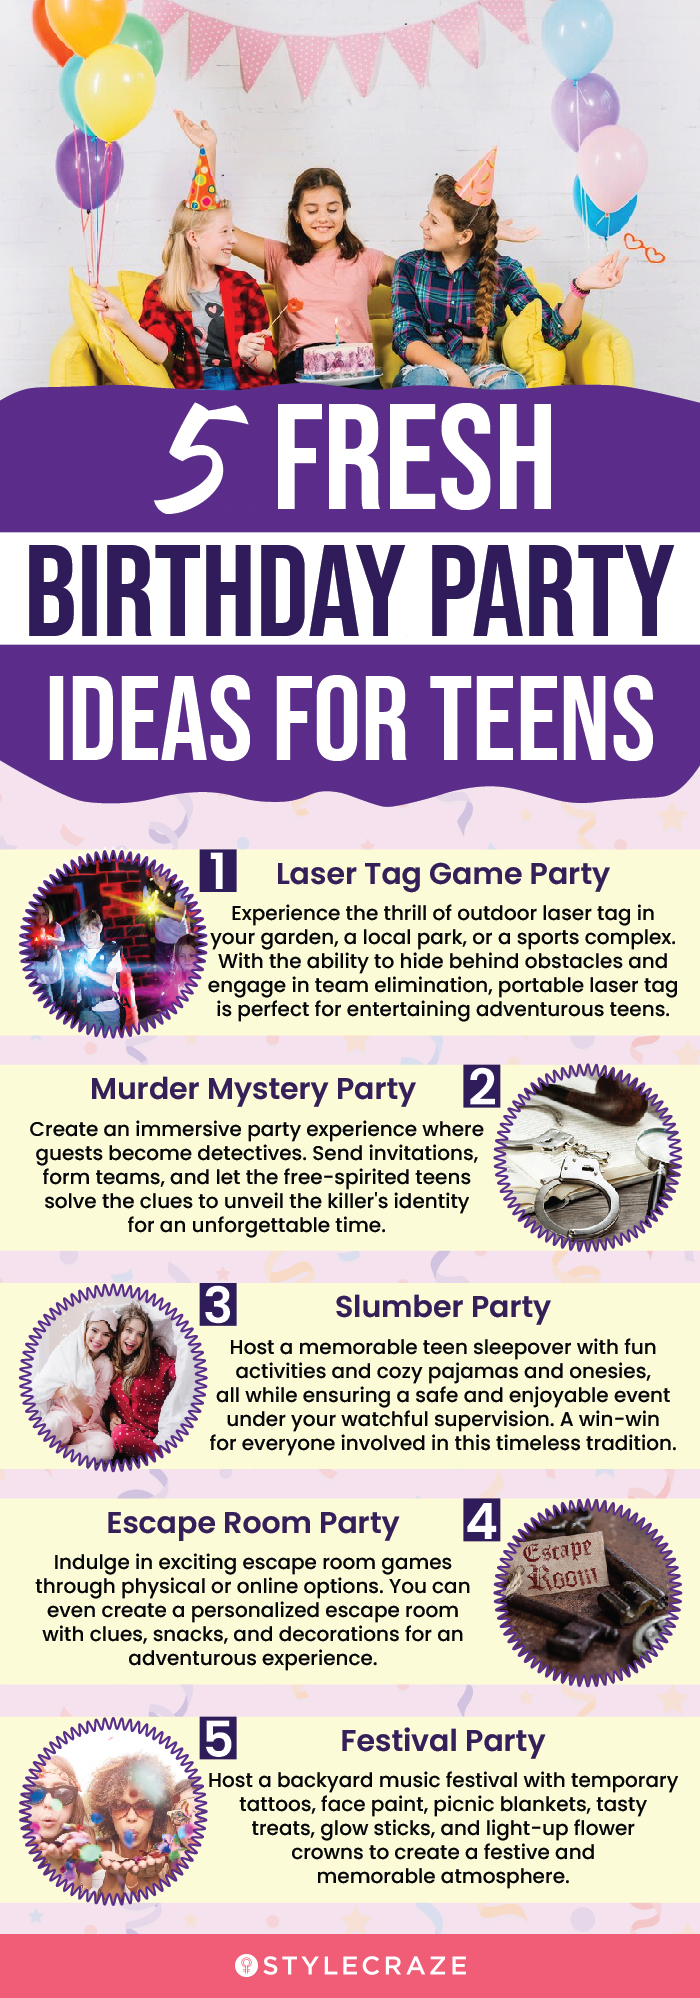 5 fresh birthday party ideas for teens (infographic)